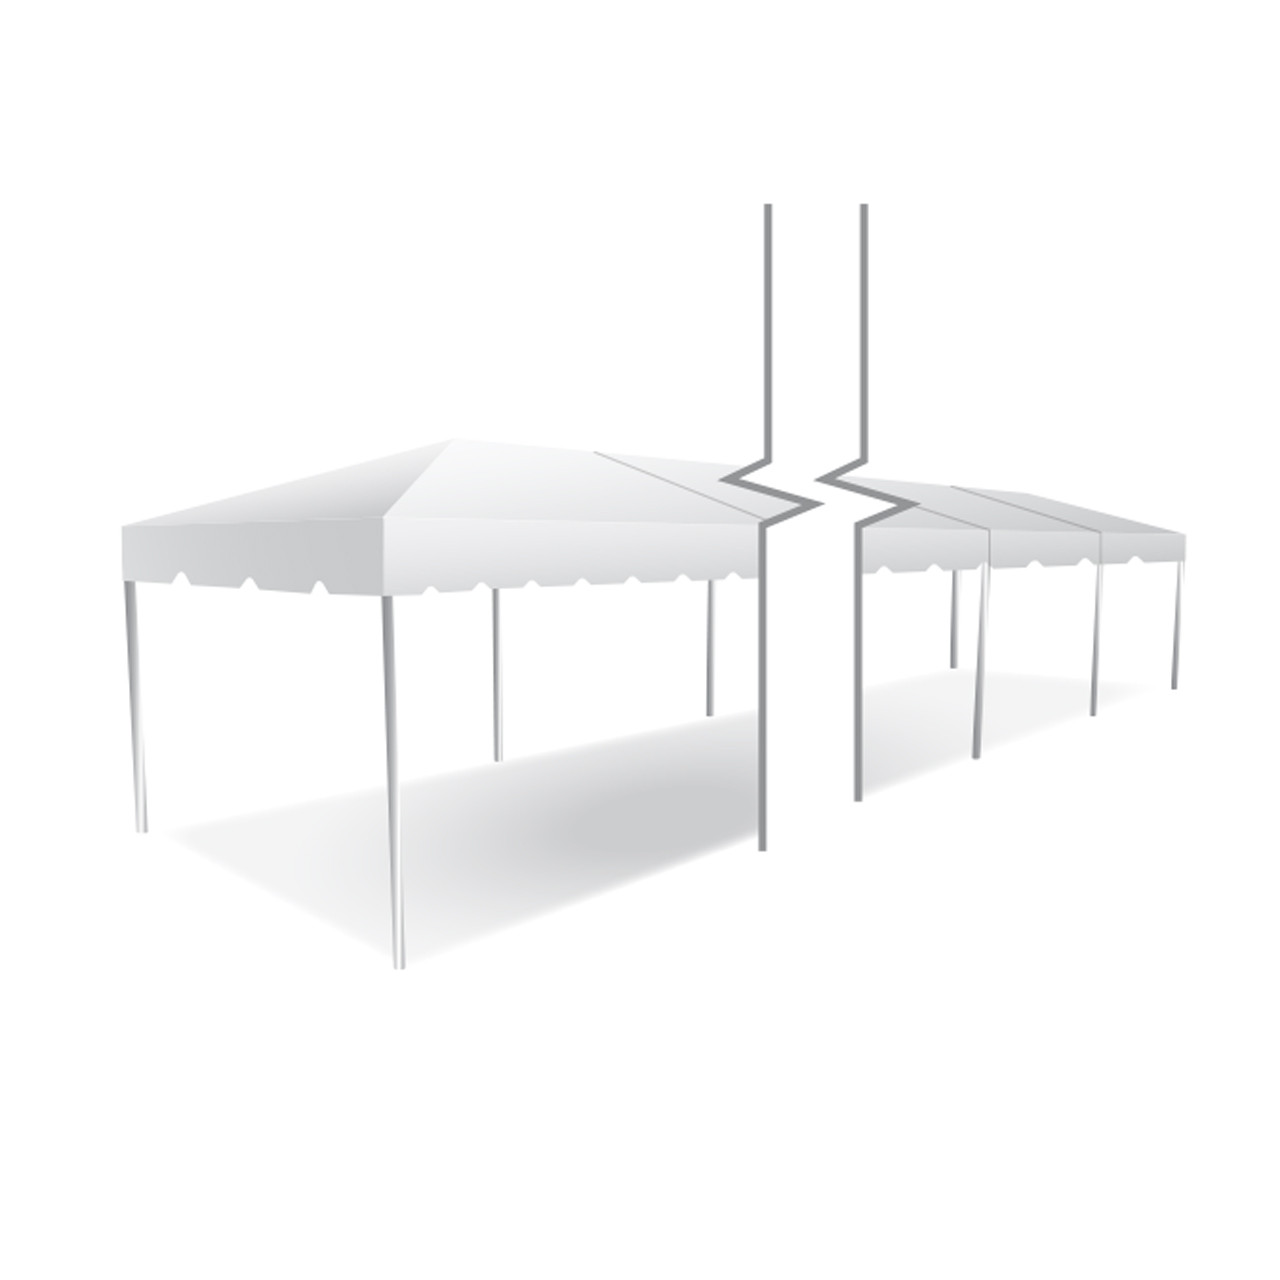 10' x 140' Classic Series Frame Tent, Sectional Tent Top, Complete